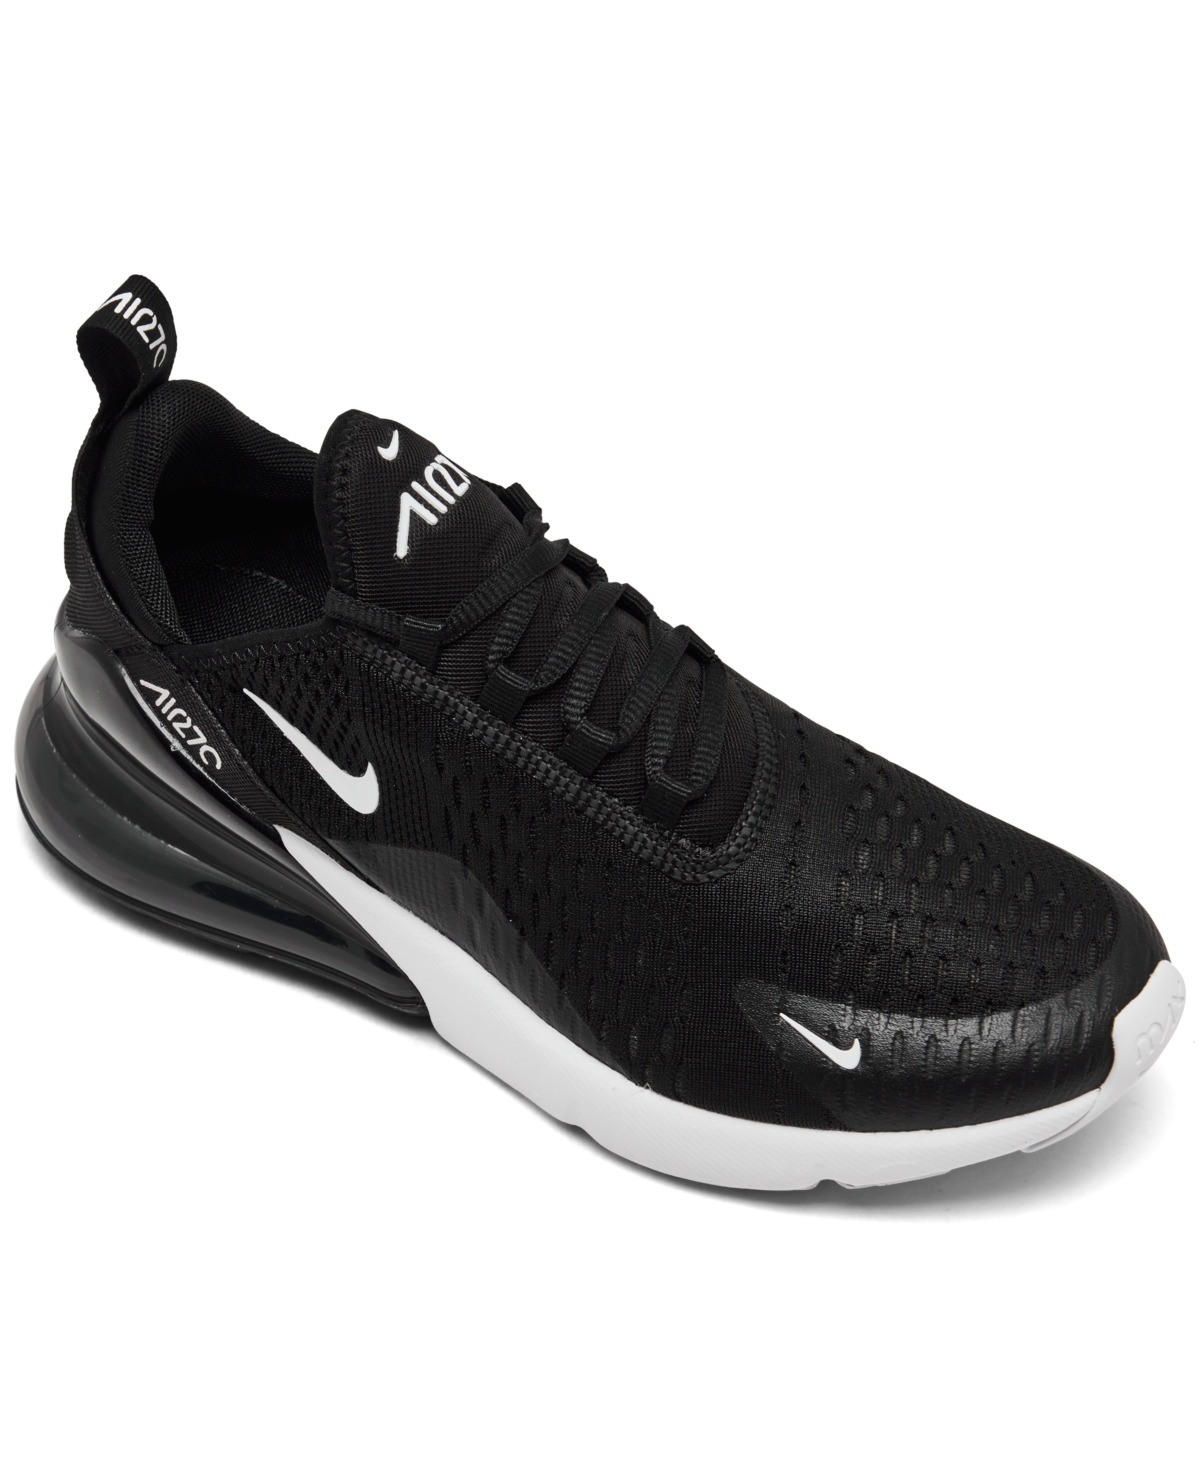 Women's Air Max 270 Casual Sneakers from Finish Line - Black, Anthracite, White